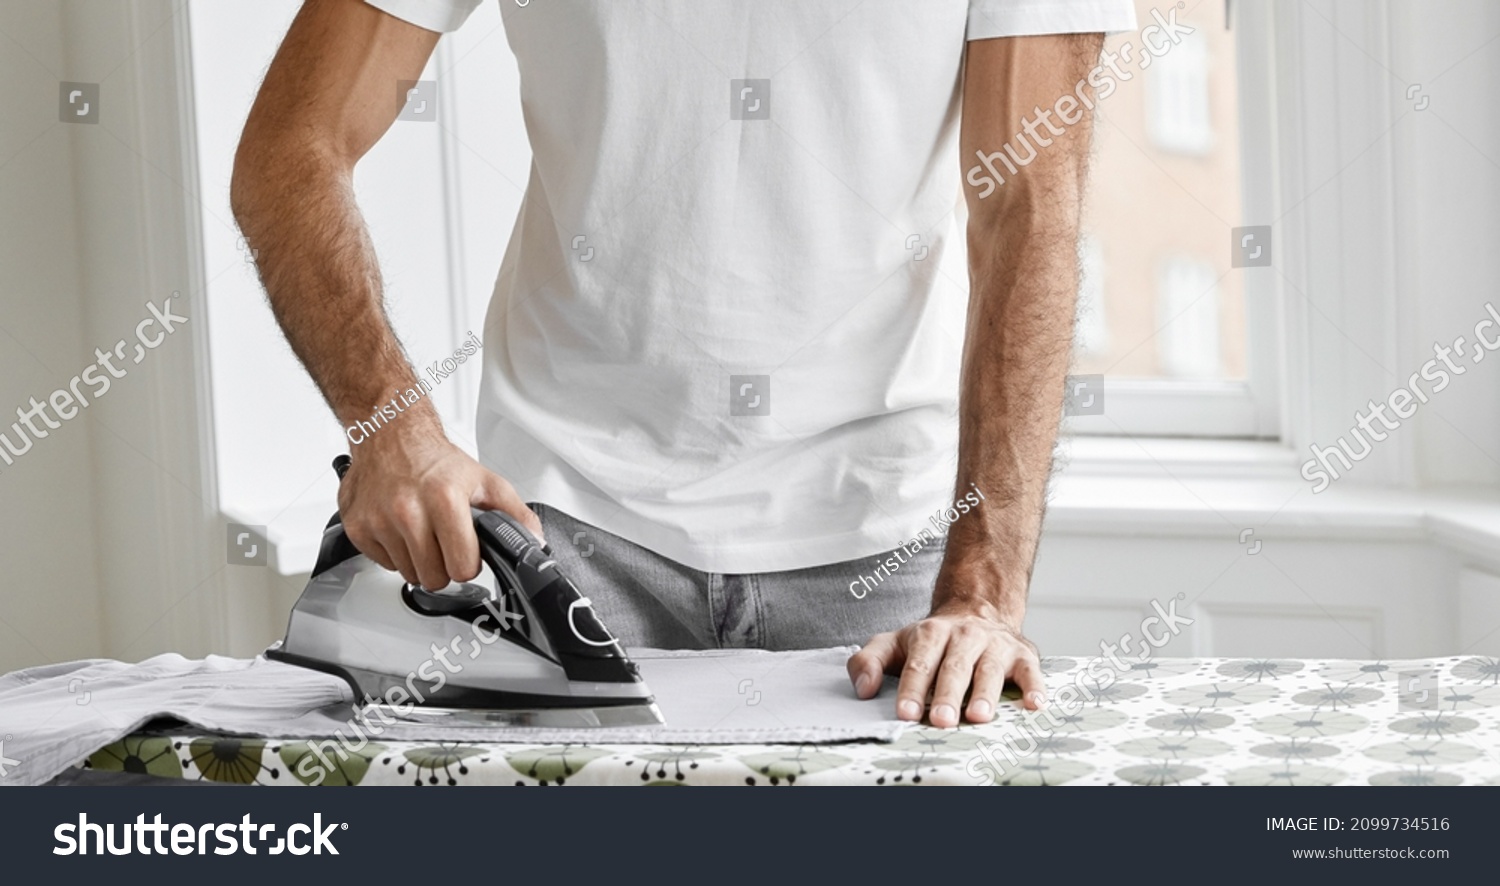 Hard-working bearded man dressed in white t shirt, irons shirt on ironing board, takes care of clothes, does household duties, poses against window background. Housework and masculinity concept #2099734516